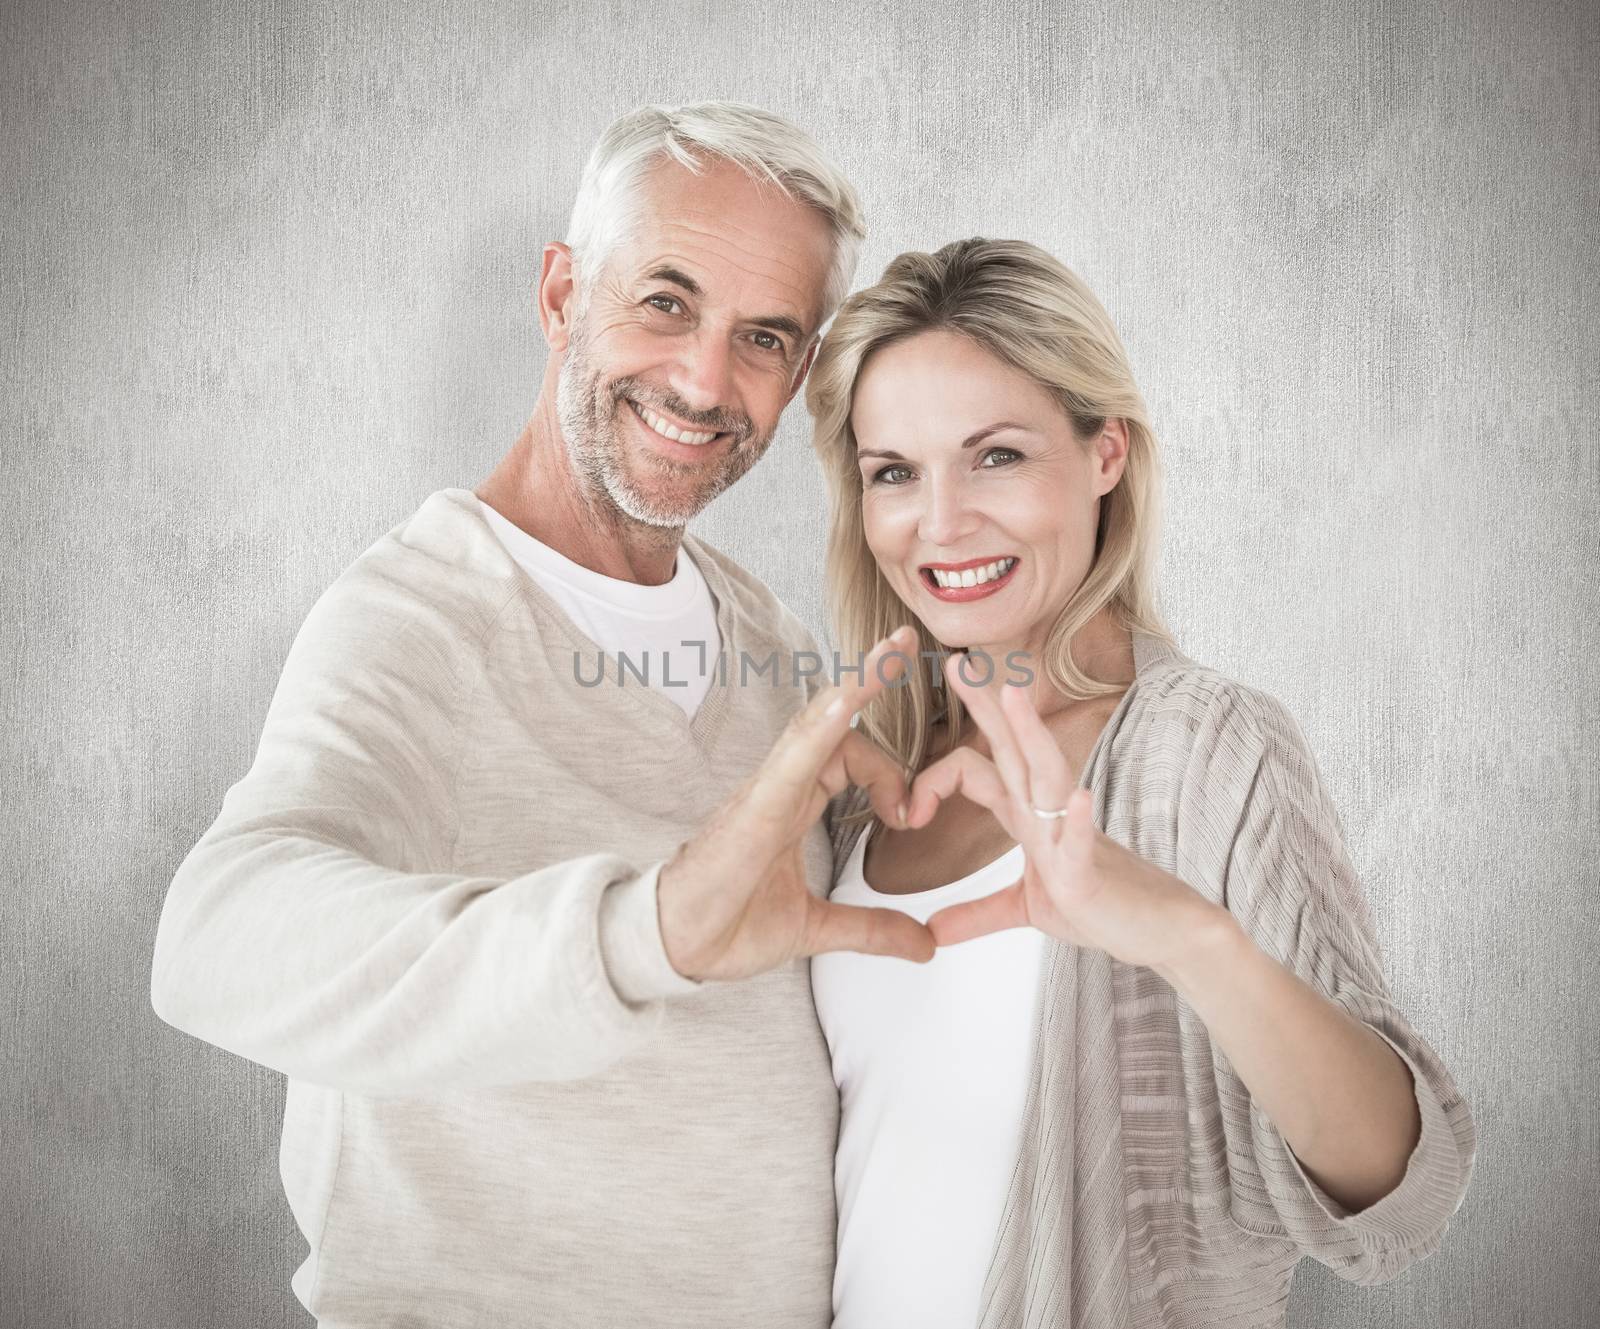 Composite image of happy couple forming heart shape with hands by Wavebreakmedia